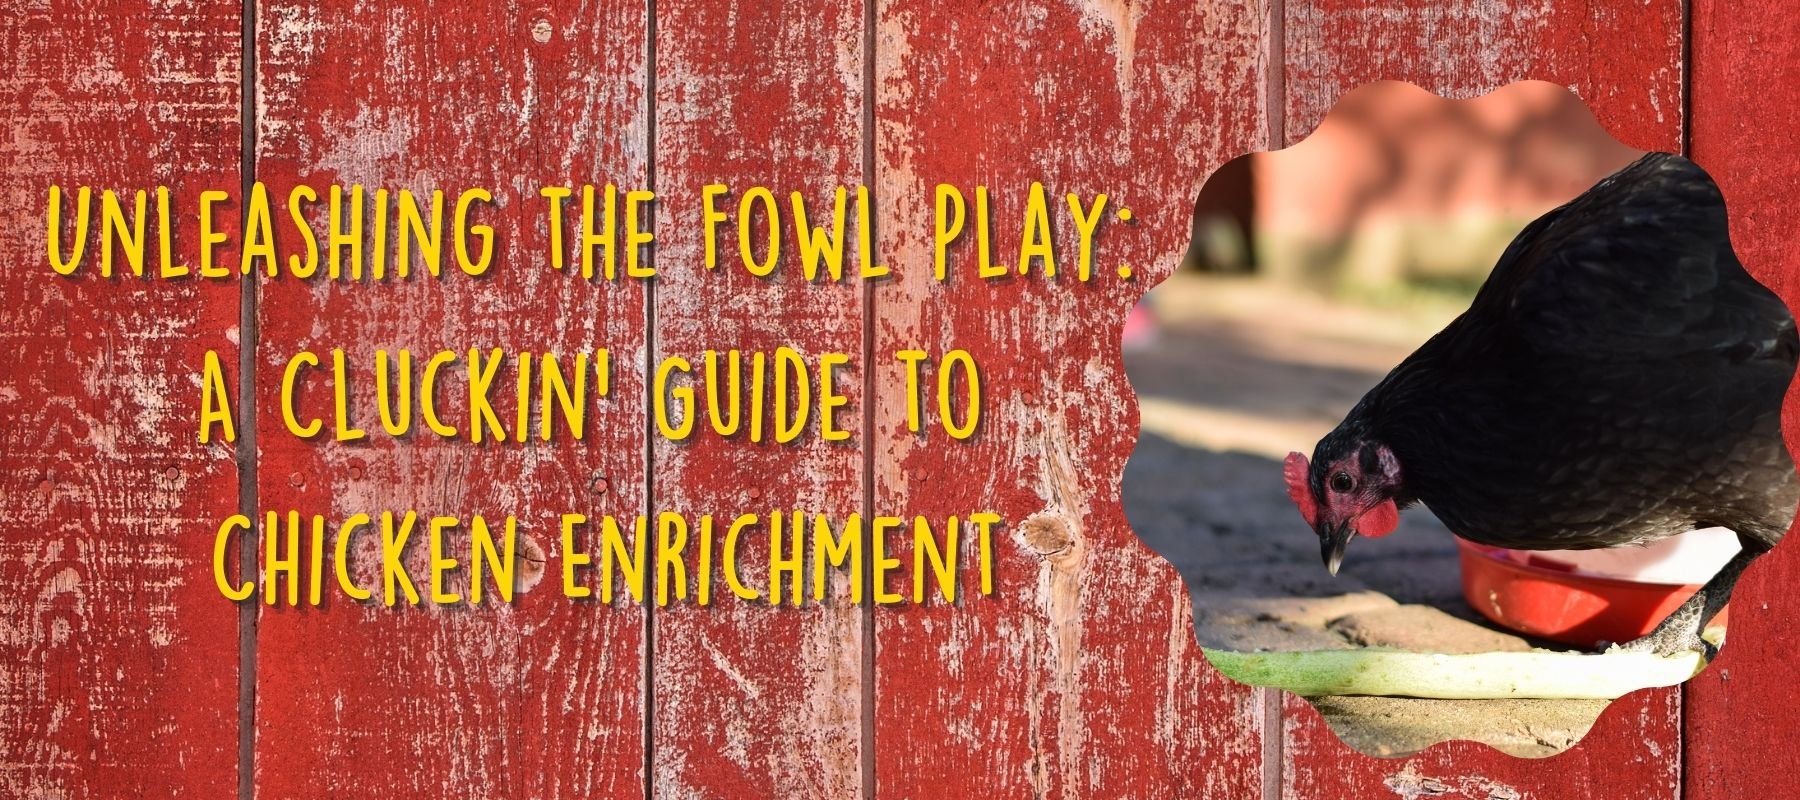 Unleashing the Fowl Play: A Cluckin' Guide to Chicken Enrichment - Cluck It All Farms